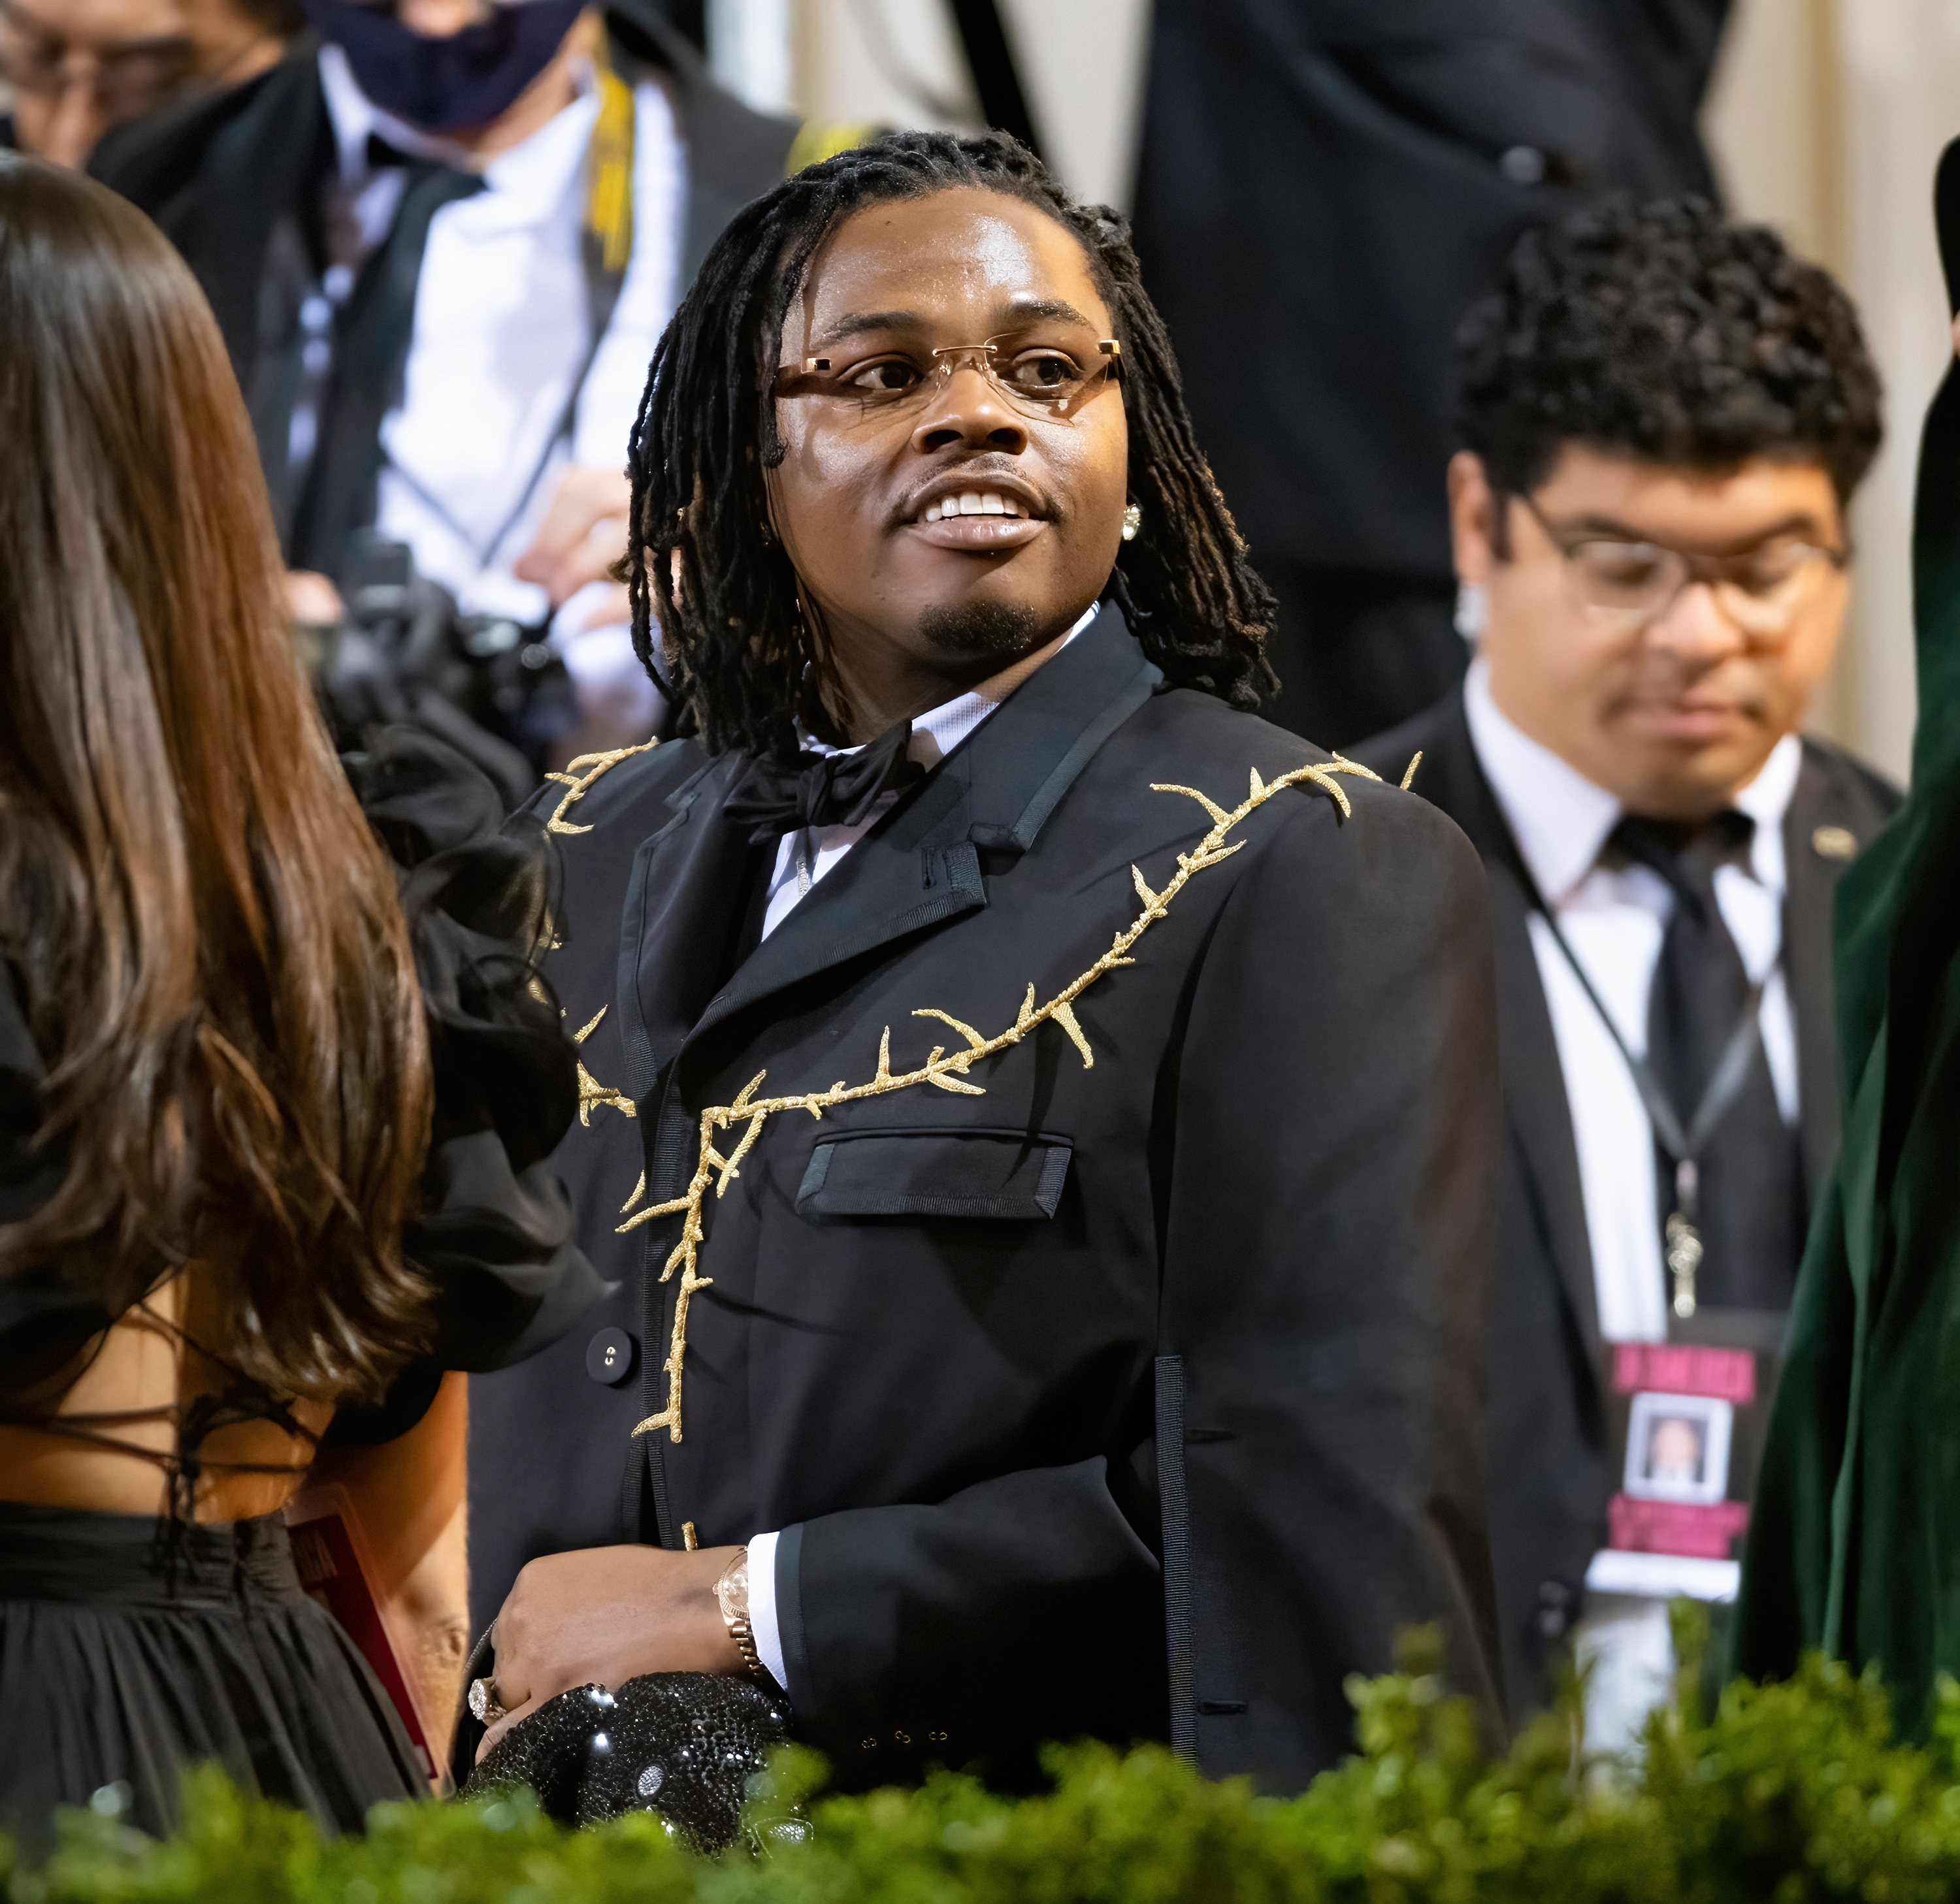 Rapper Gunna at The Metropolitan Museum of Art on May 02, 2022, in New York City. | Source: Getty Images